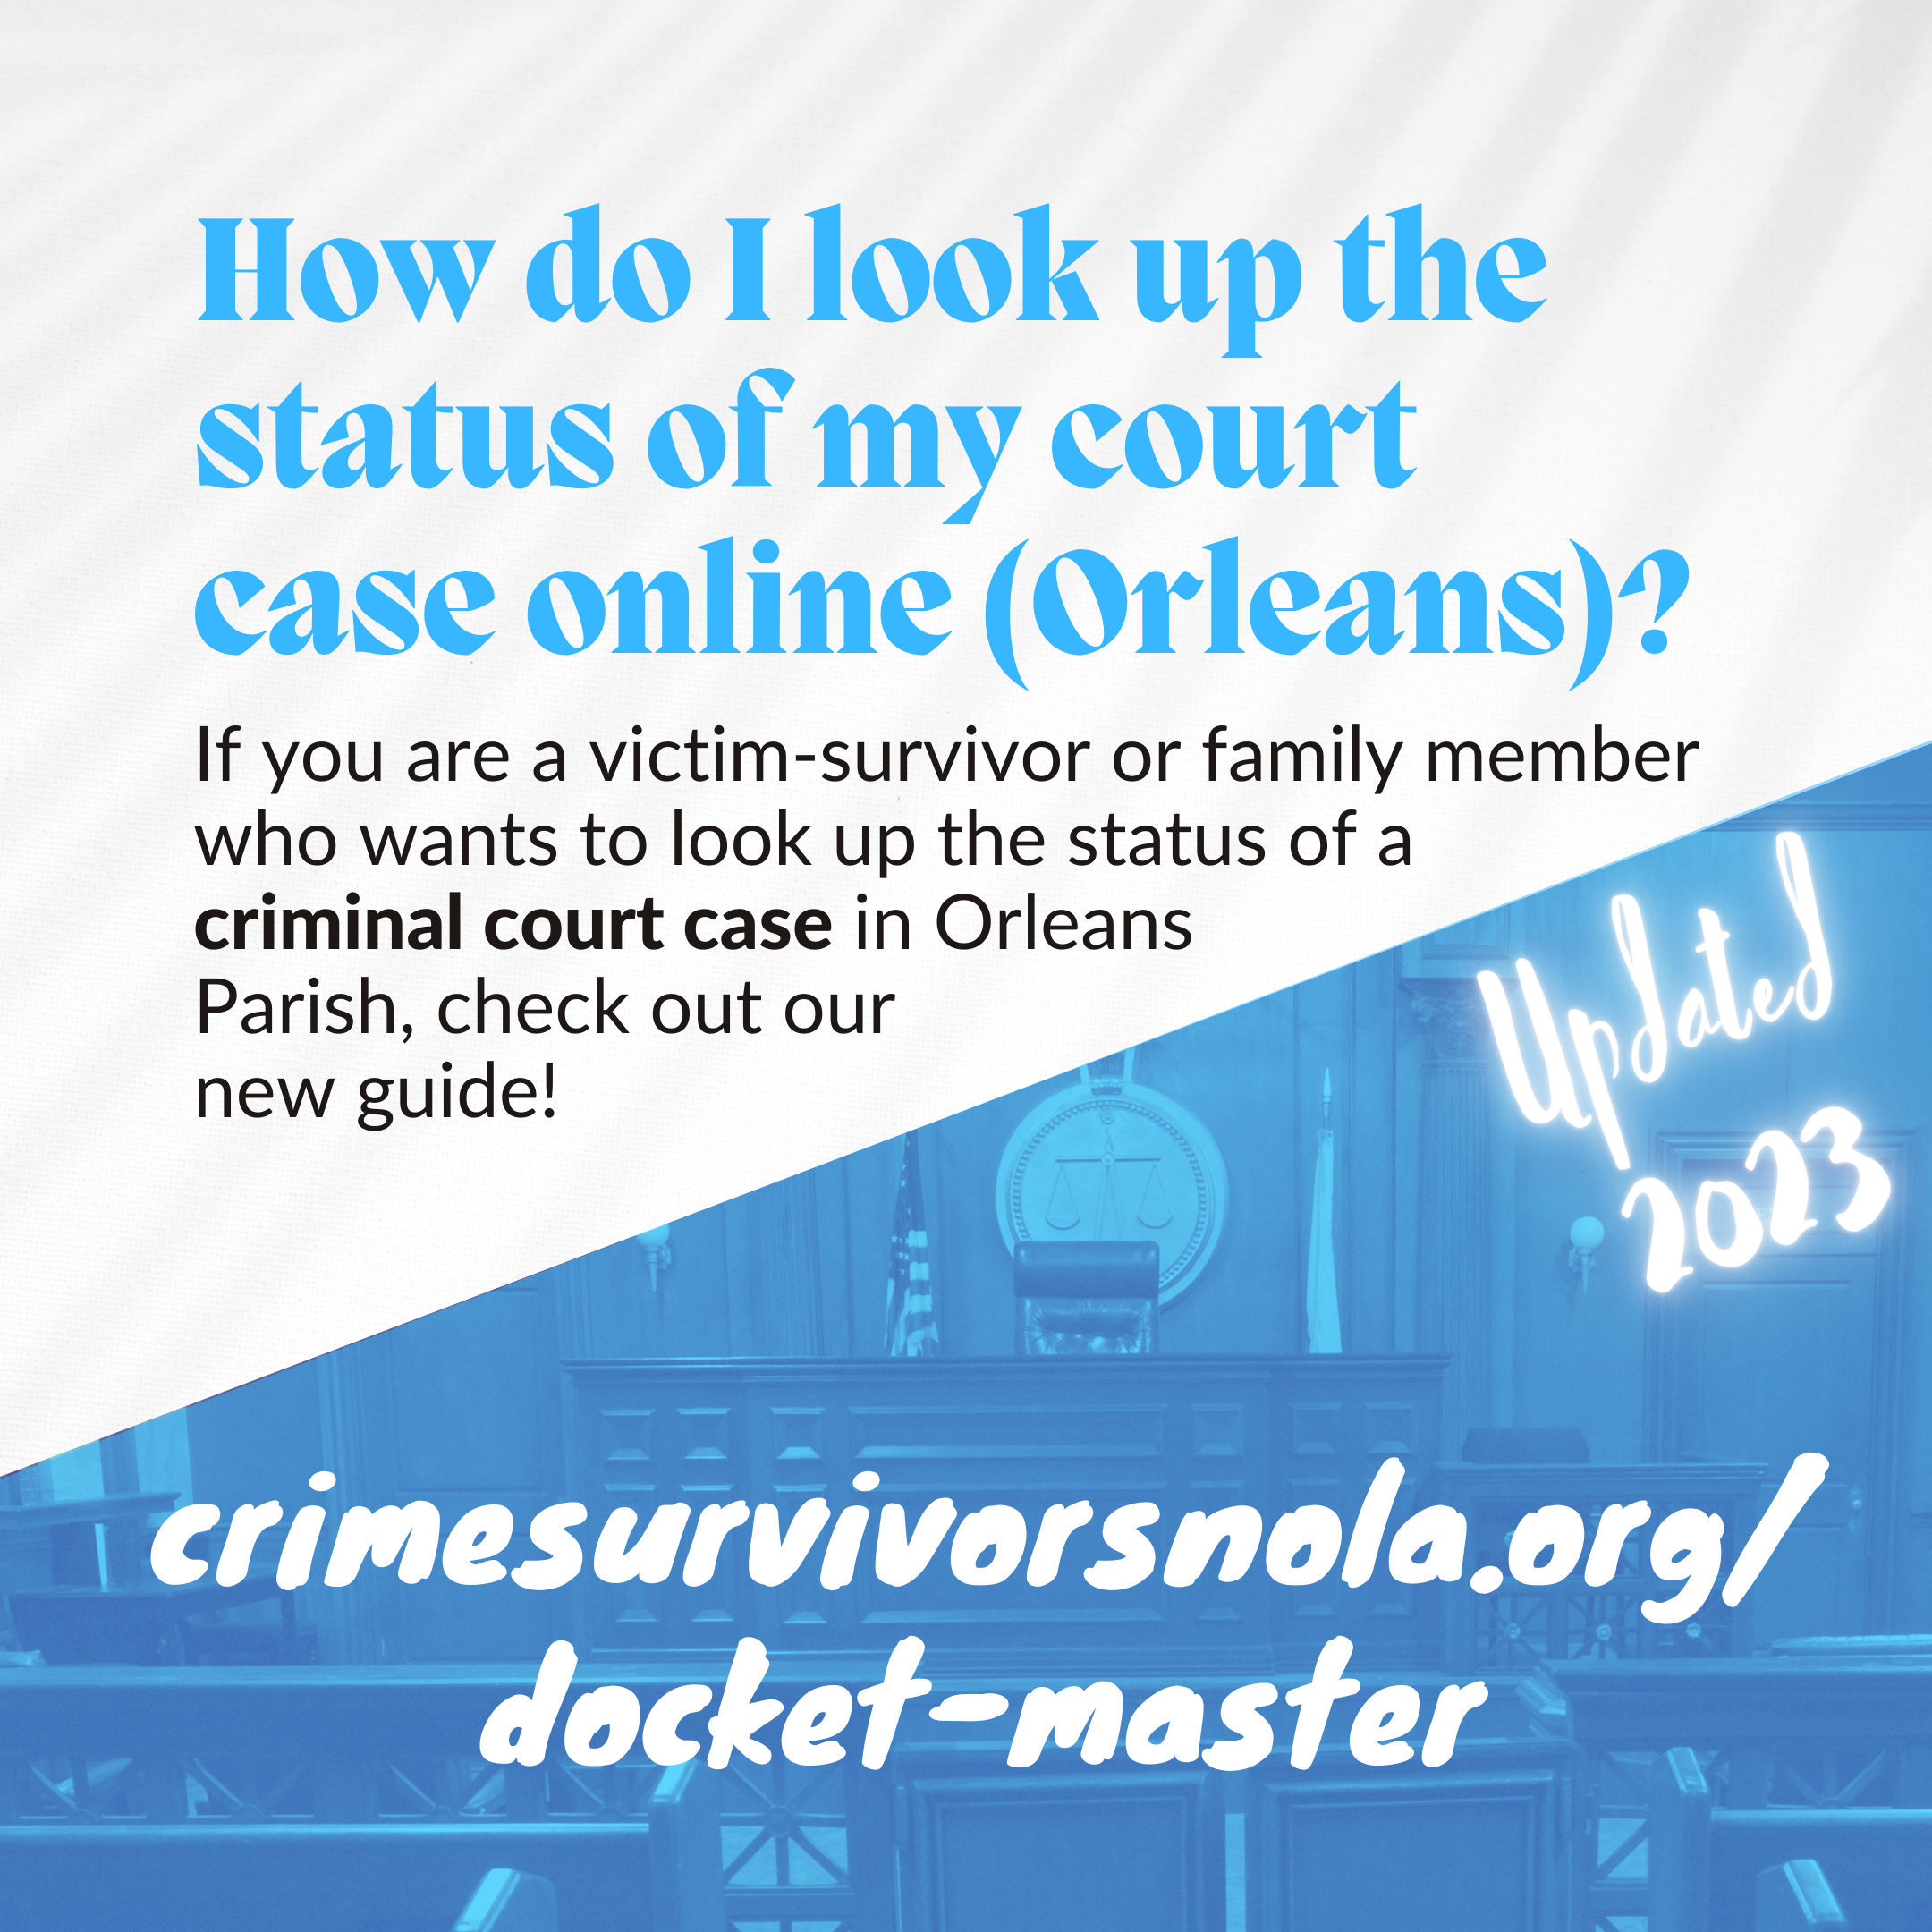 How do I look up the status of an Orleans Parish criminal court case online?